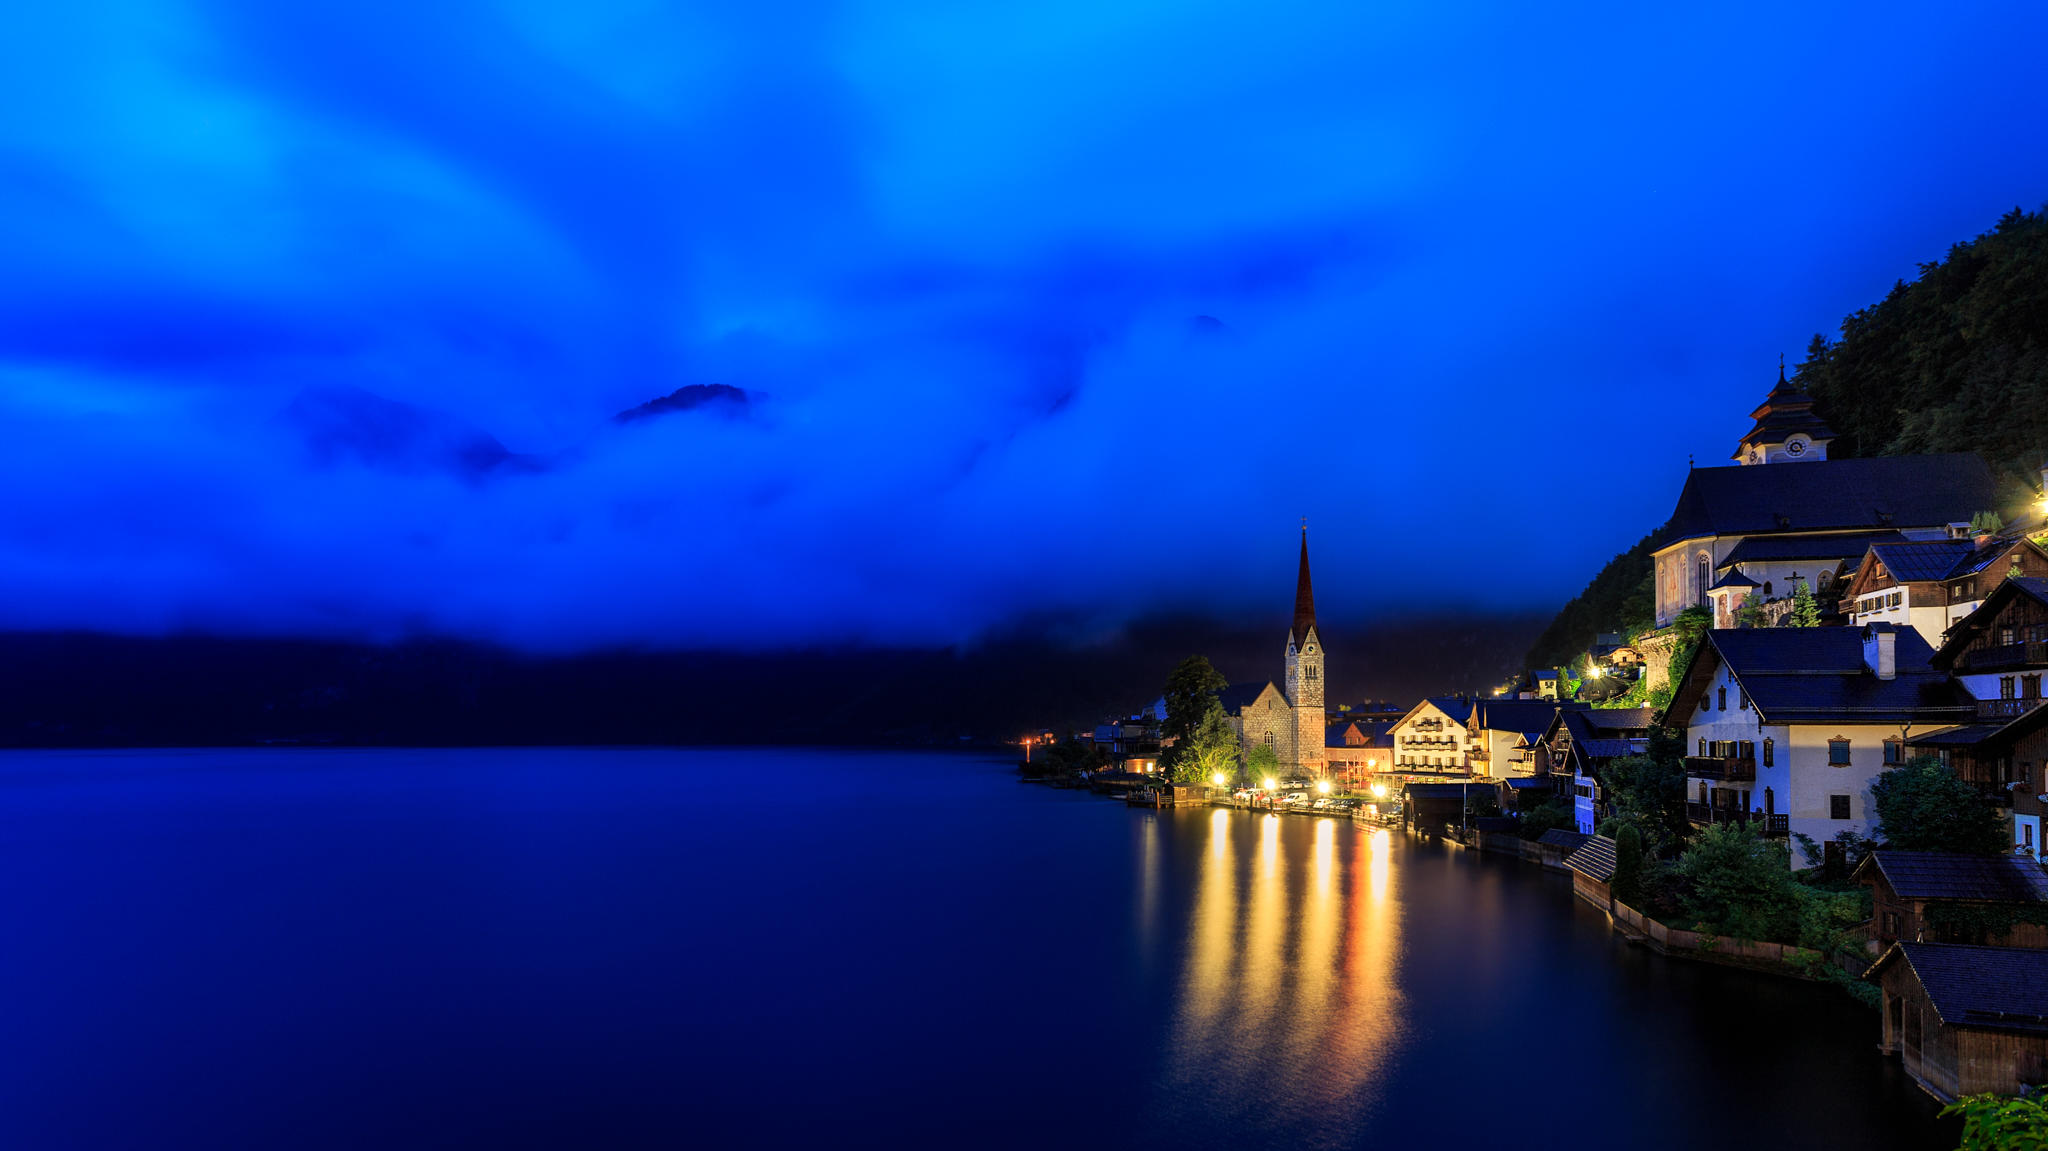 Wallpapers Halstatt evening at home by the water on the desktop